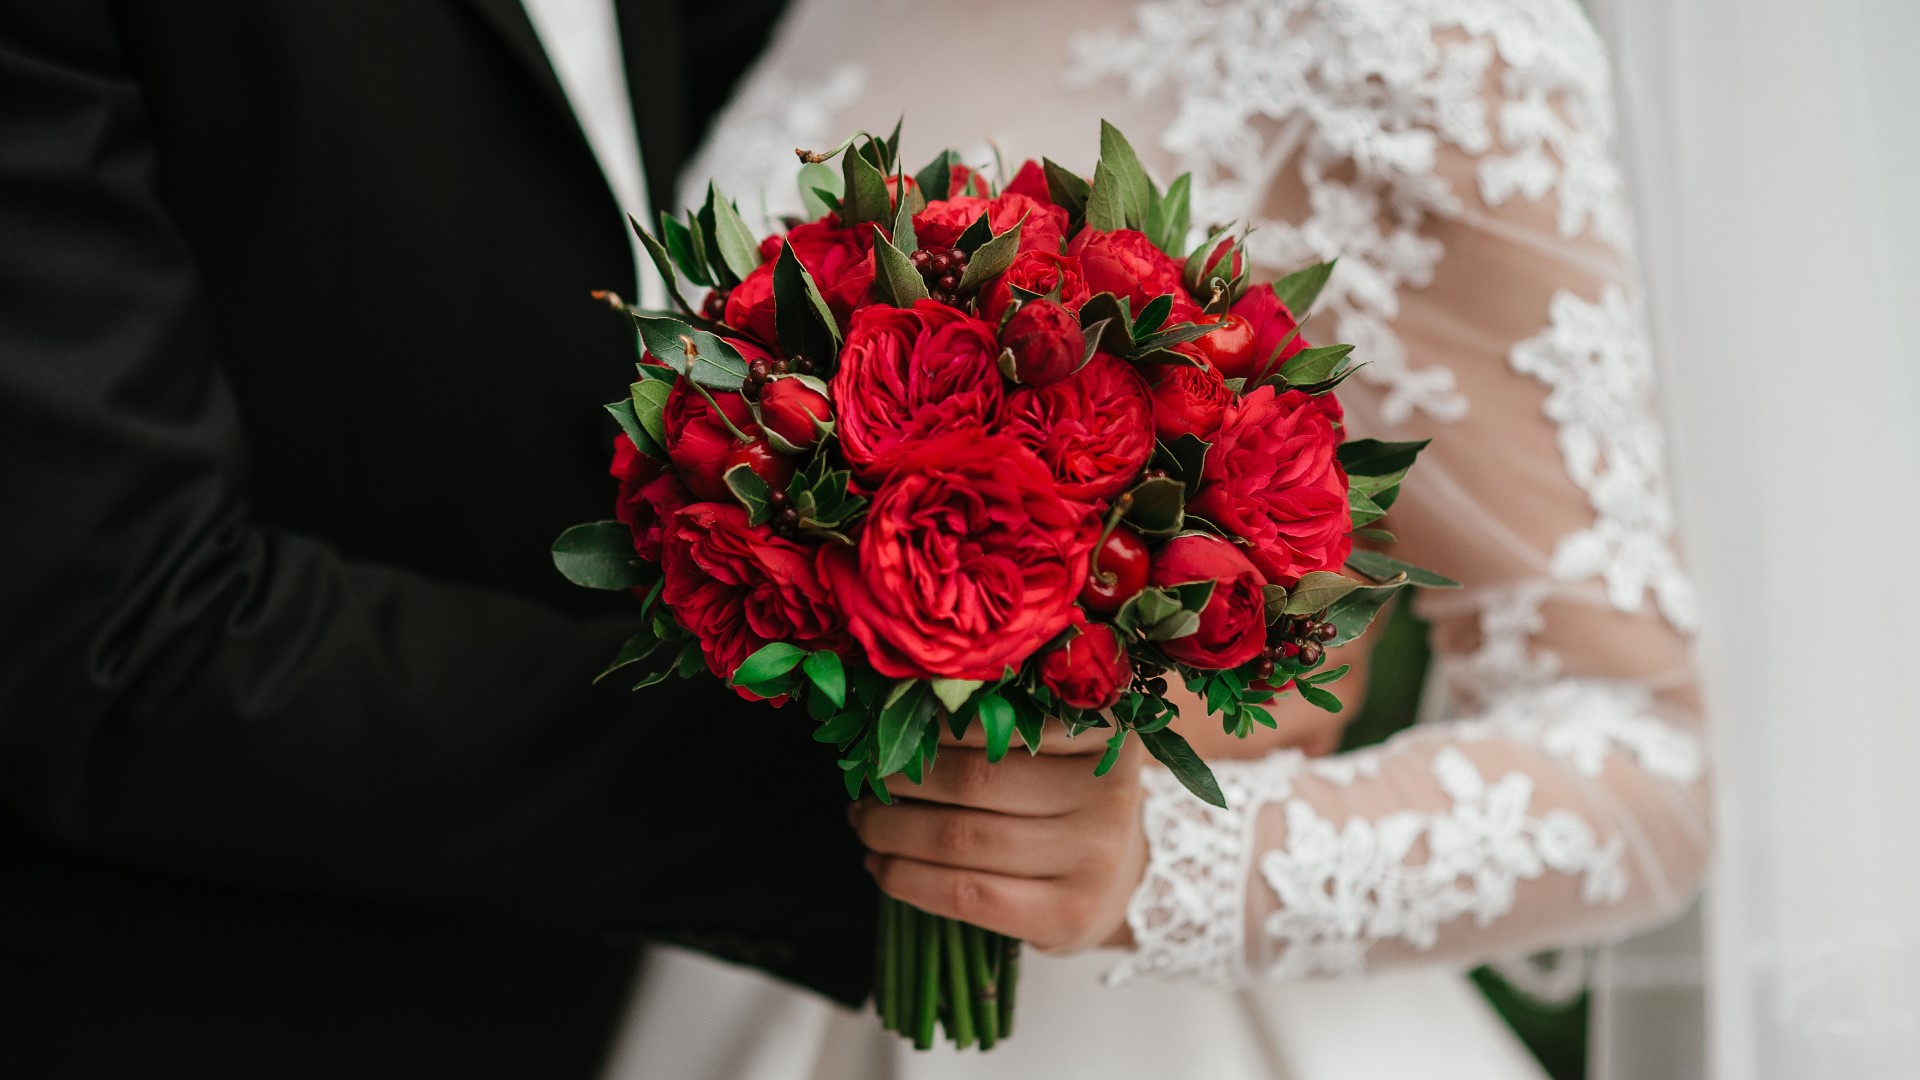 Couples who postponed their weddings in 2020 due to COVID are getting ready to tie the knot. But trends are changing. Big events are out. Microweddings are in.